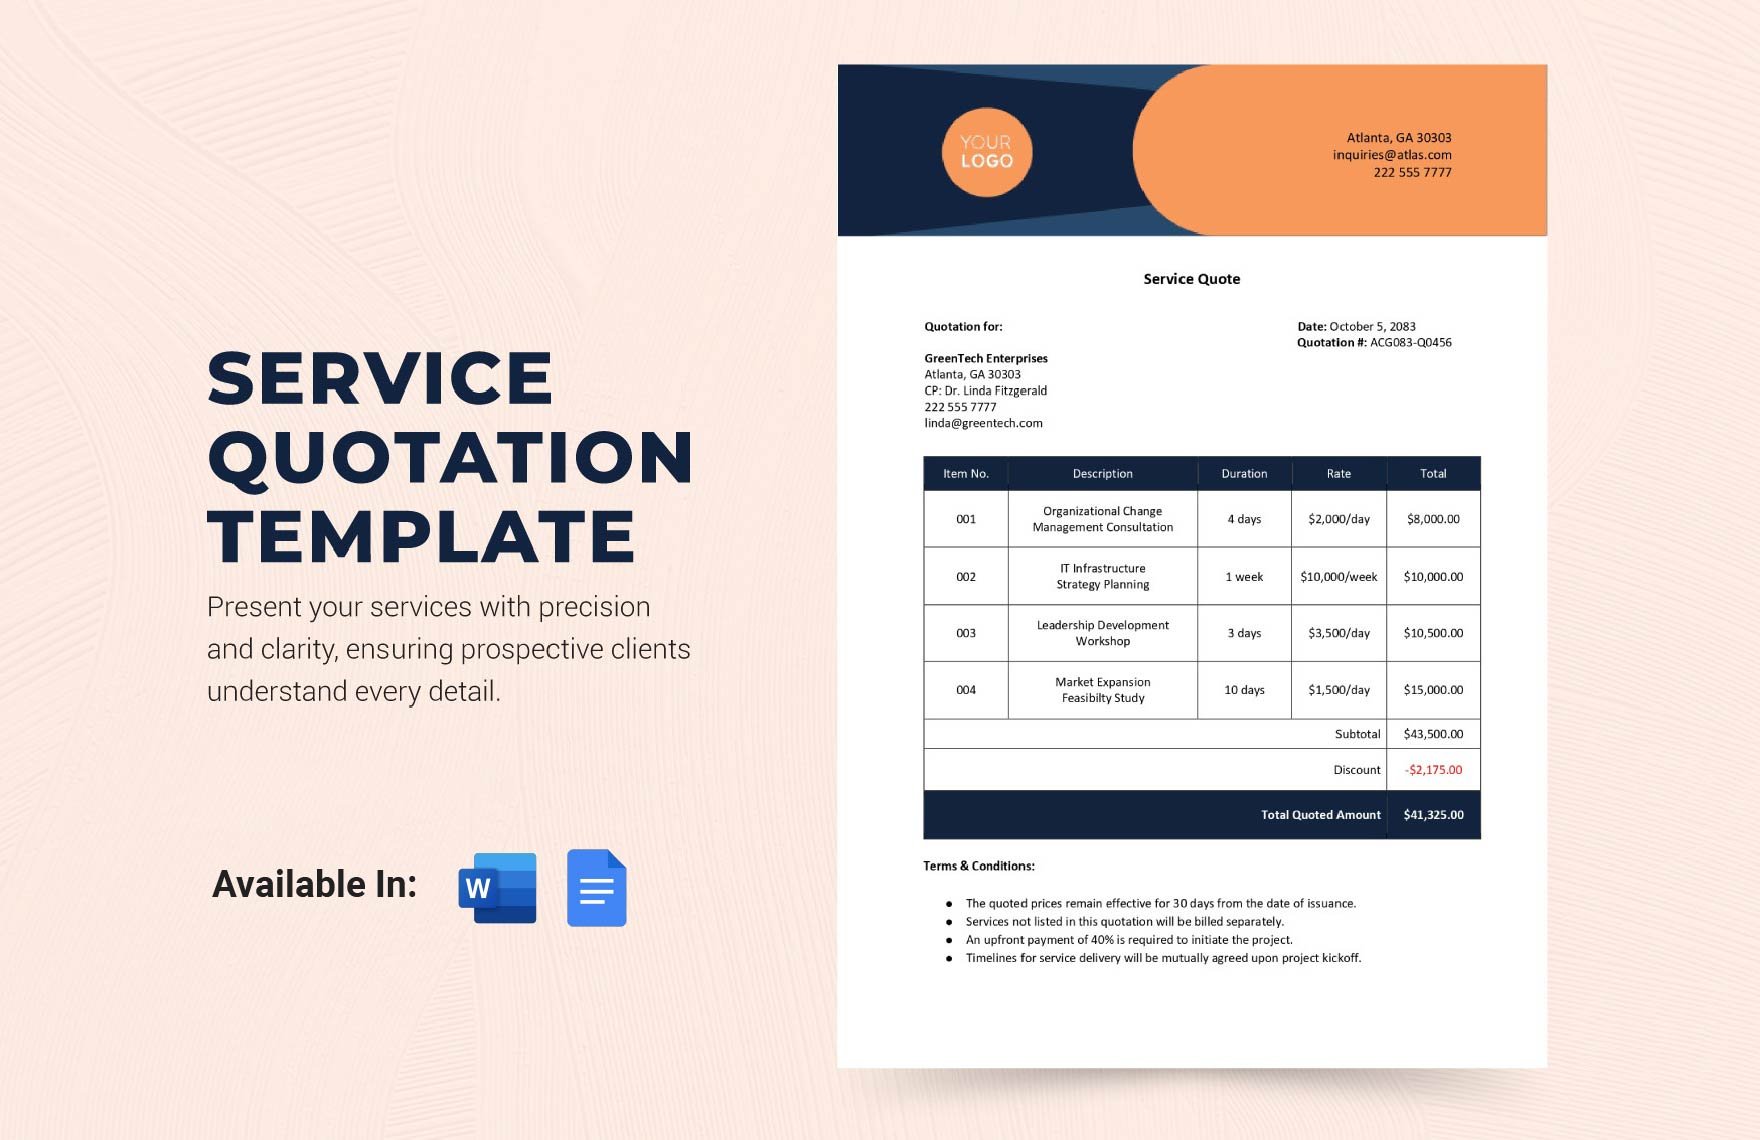 Service Quotation Template in Word, Google Docs